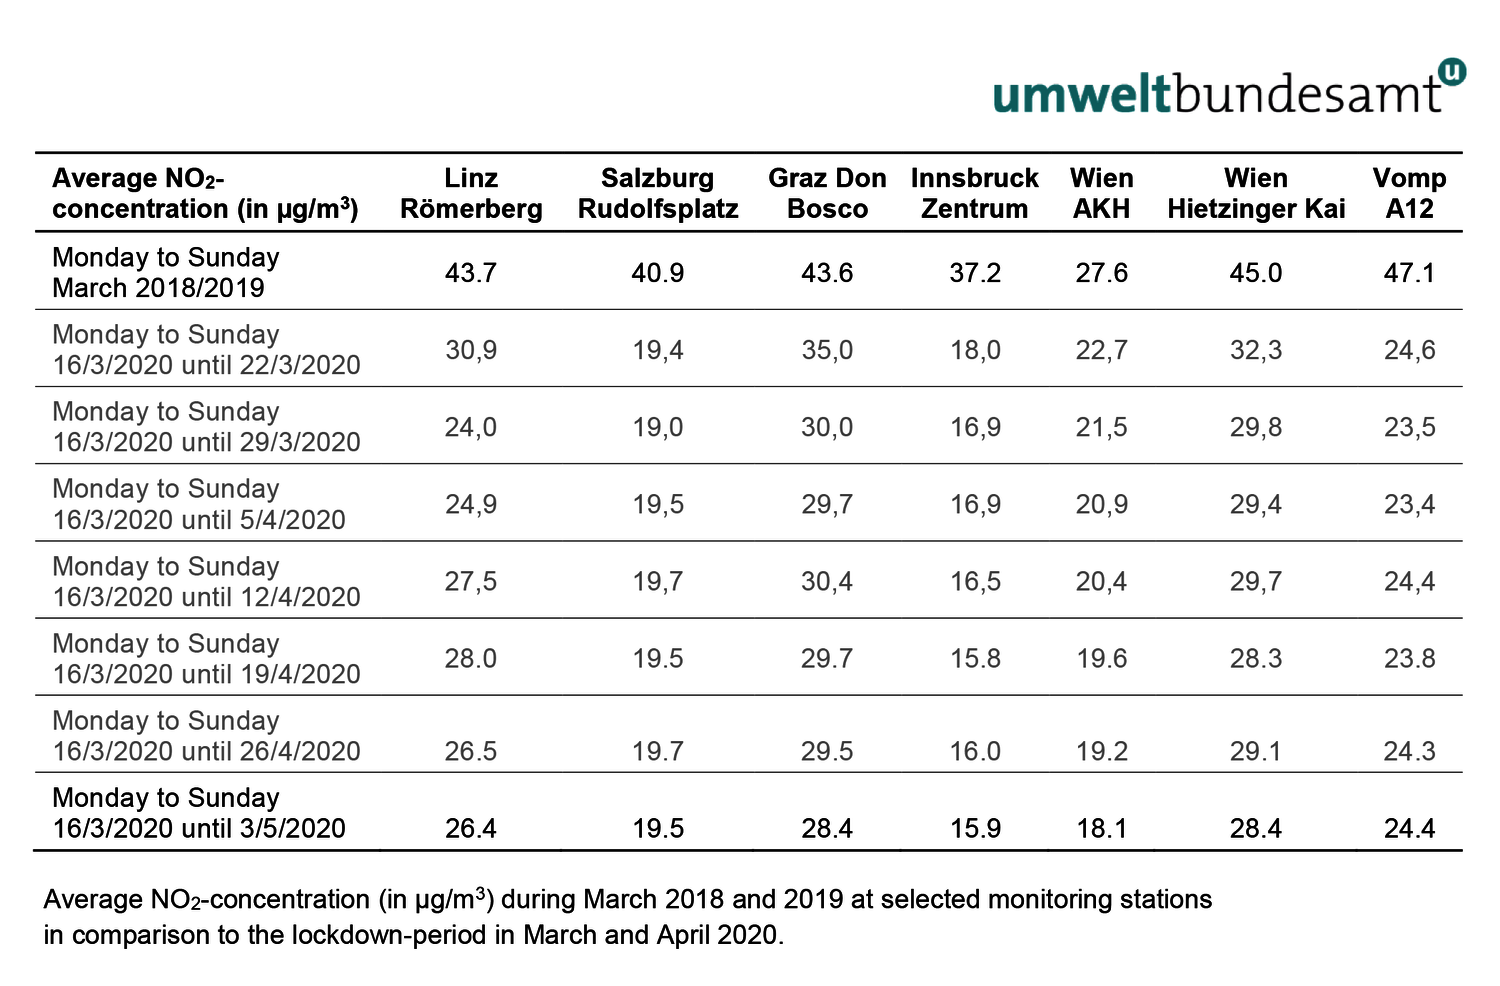 Table of average NO2-concentration during March 2018 and 2019 at selected monitoring station in comparison to the lockdown-period in March and April 2020